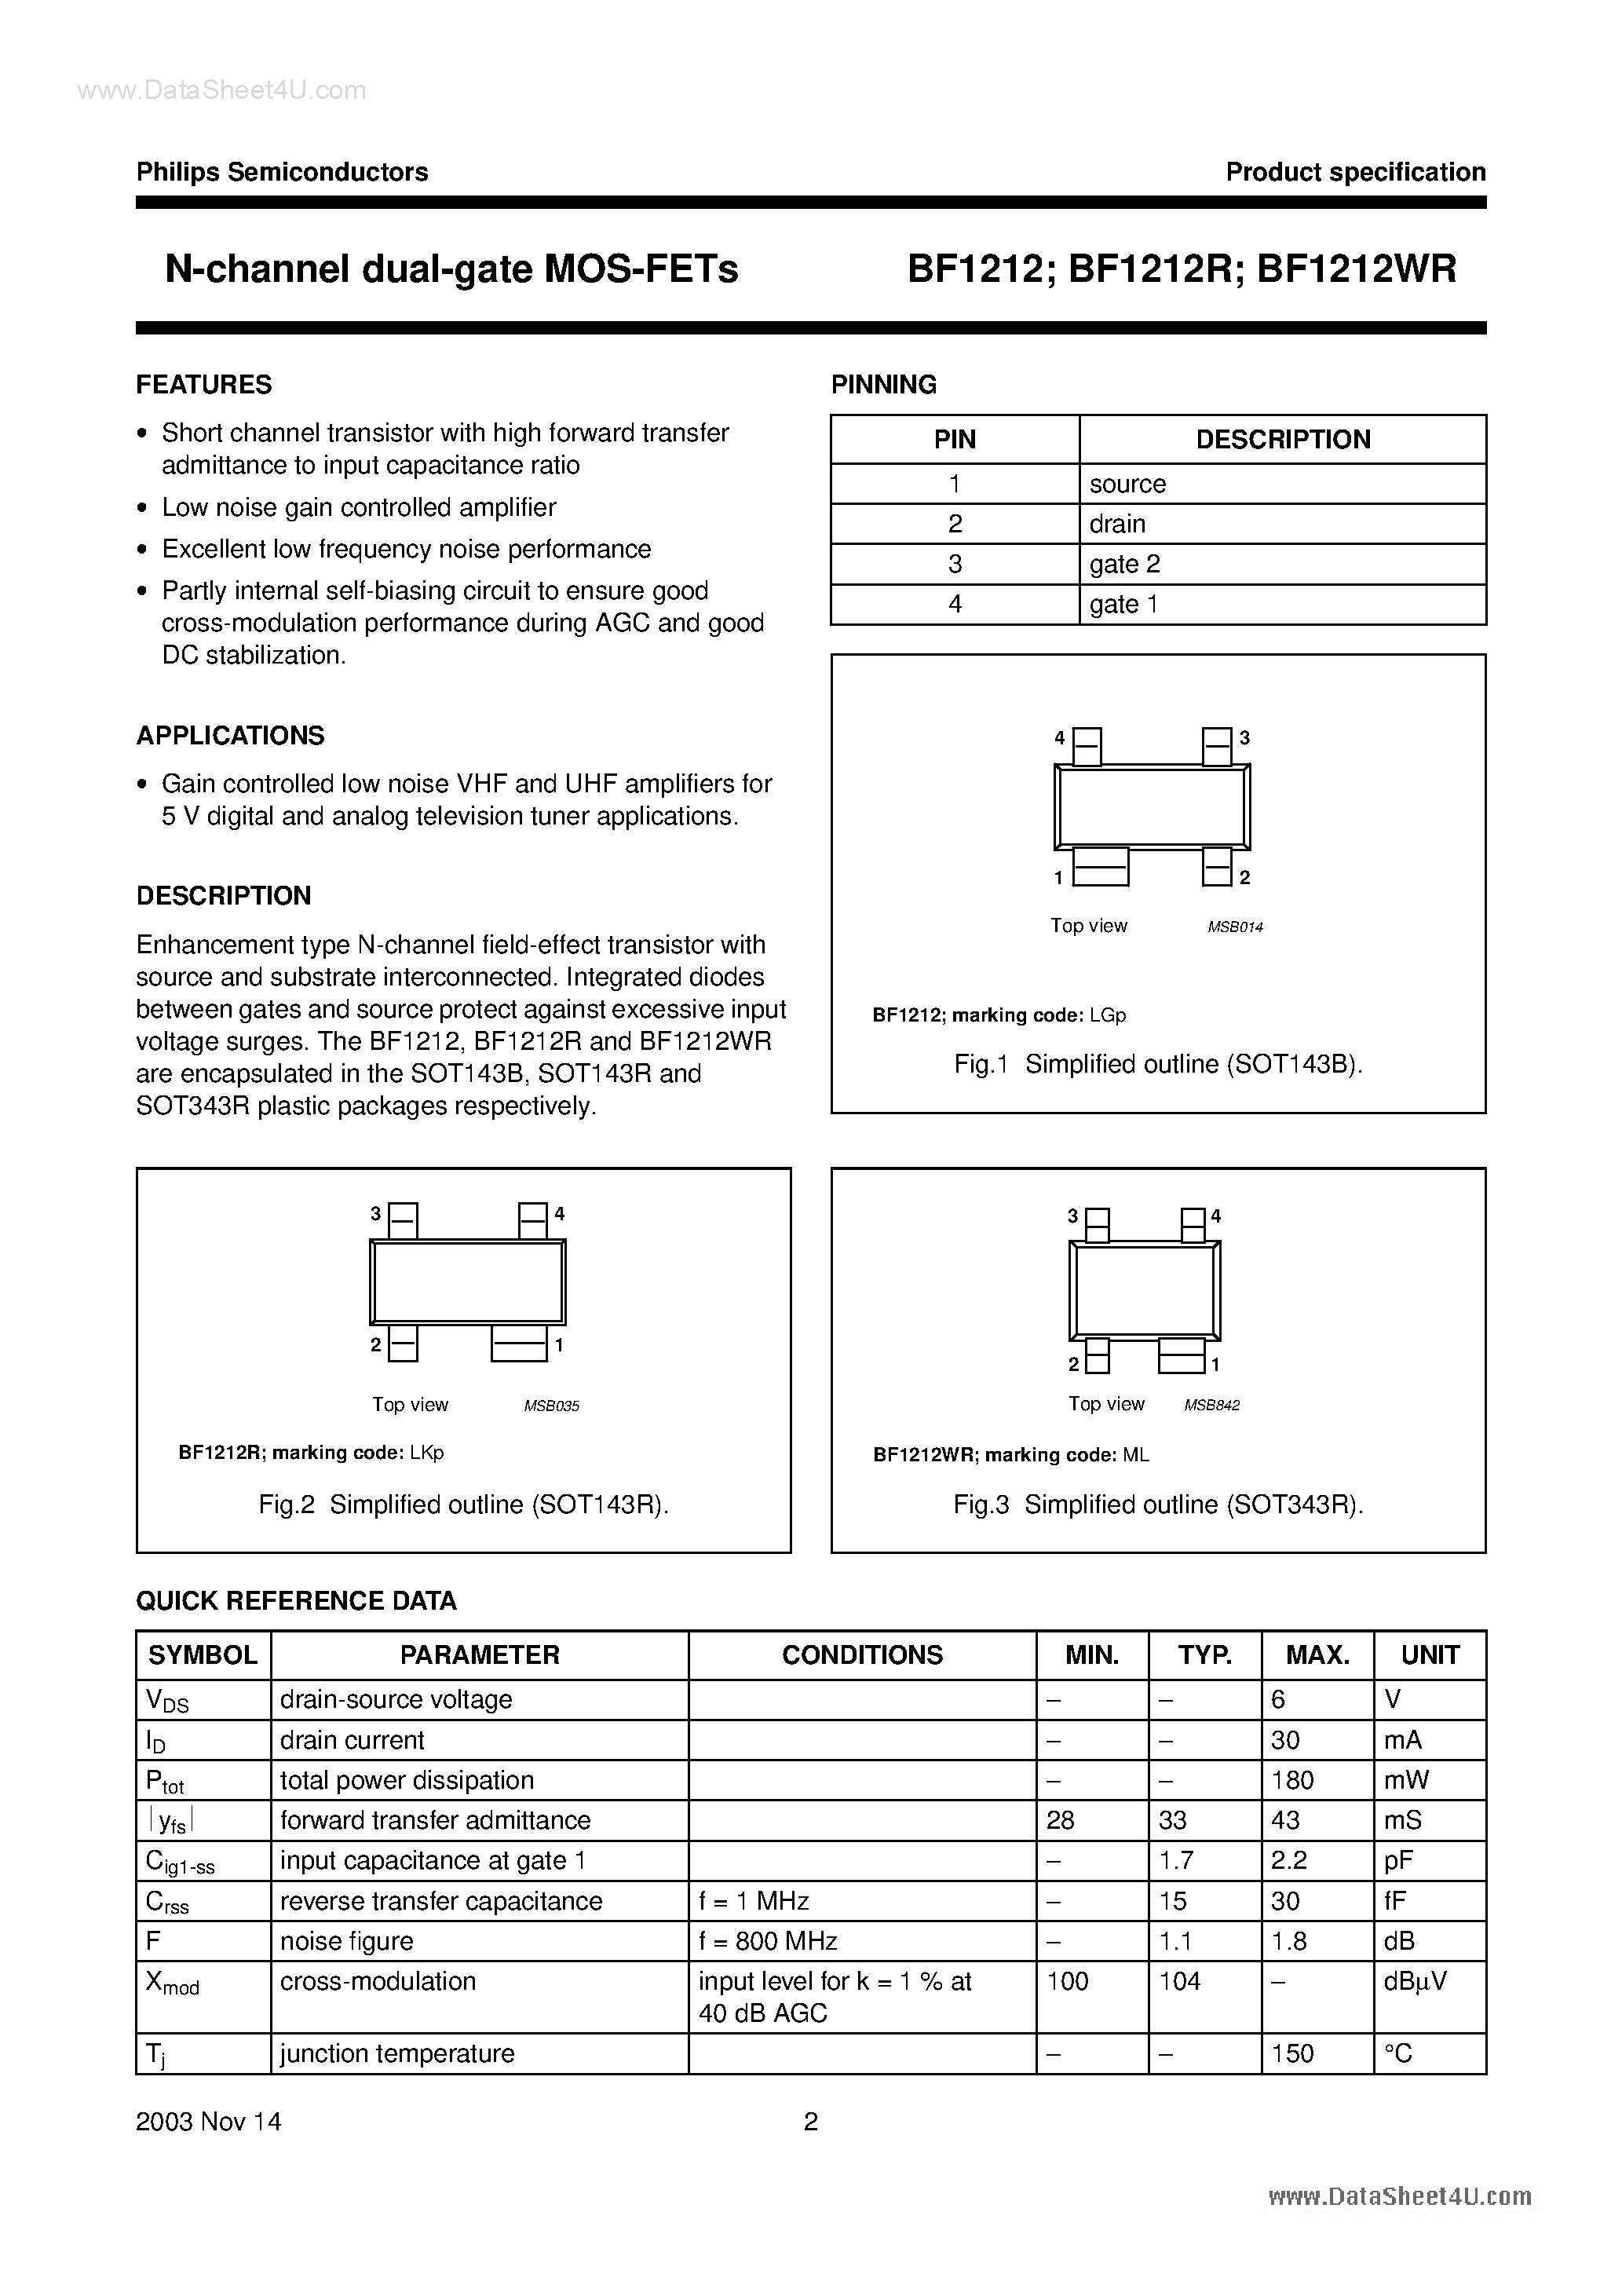 Datasheet BF1212 - N-channel dual-gate MOS-FETs page 2